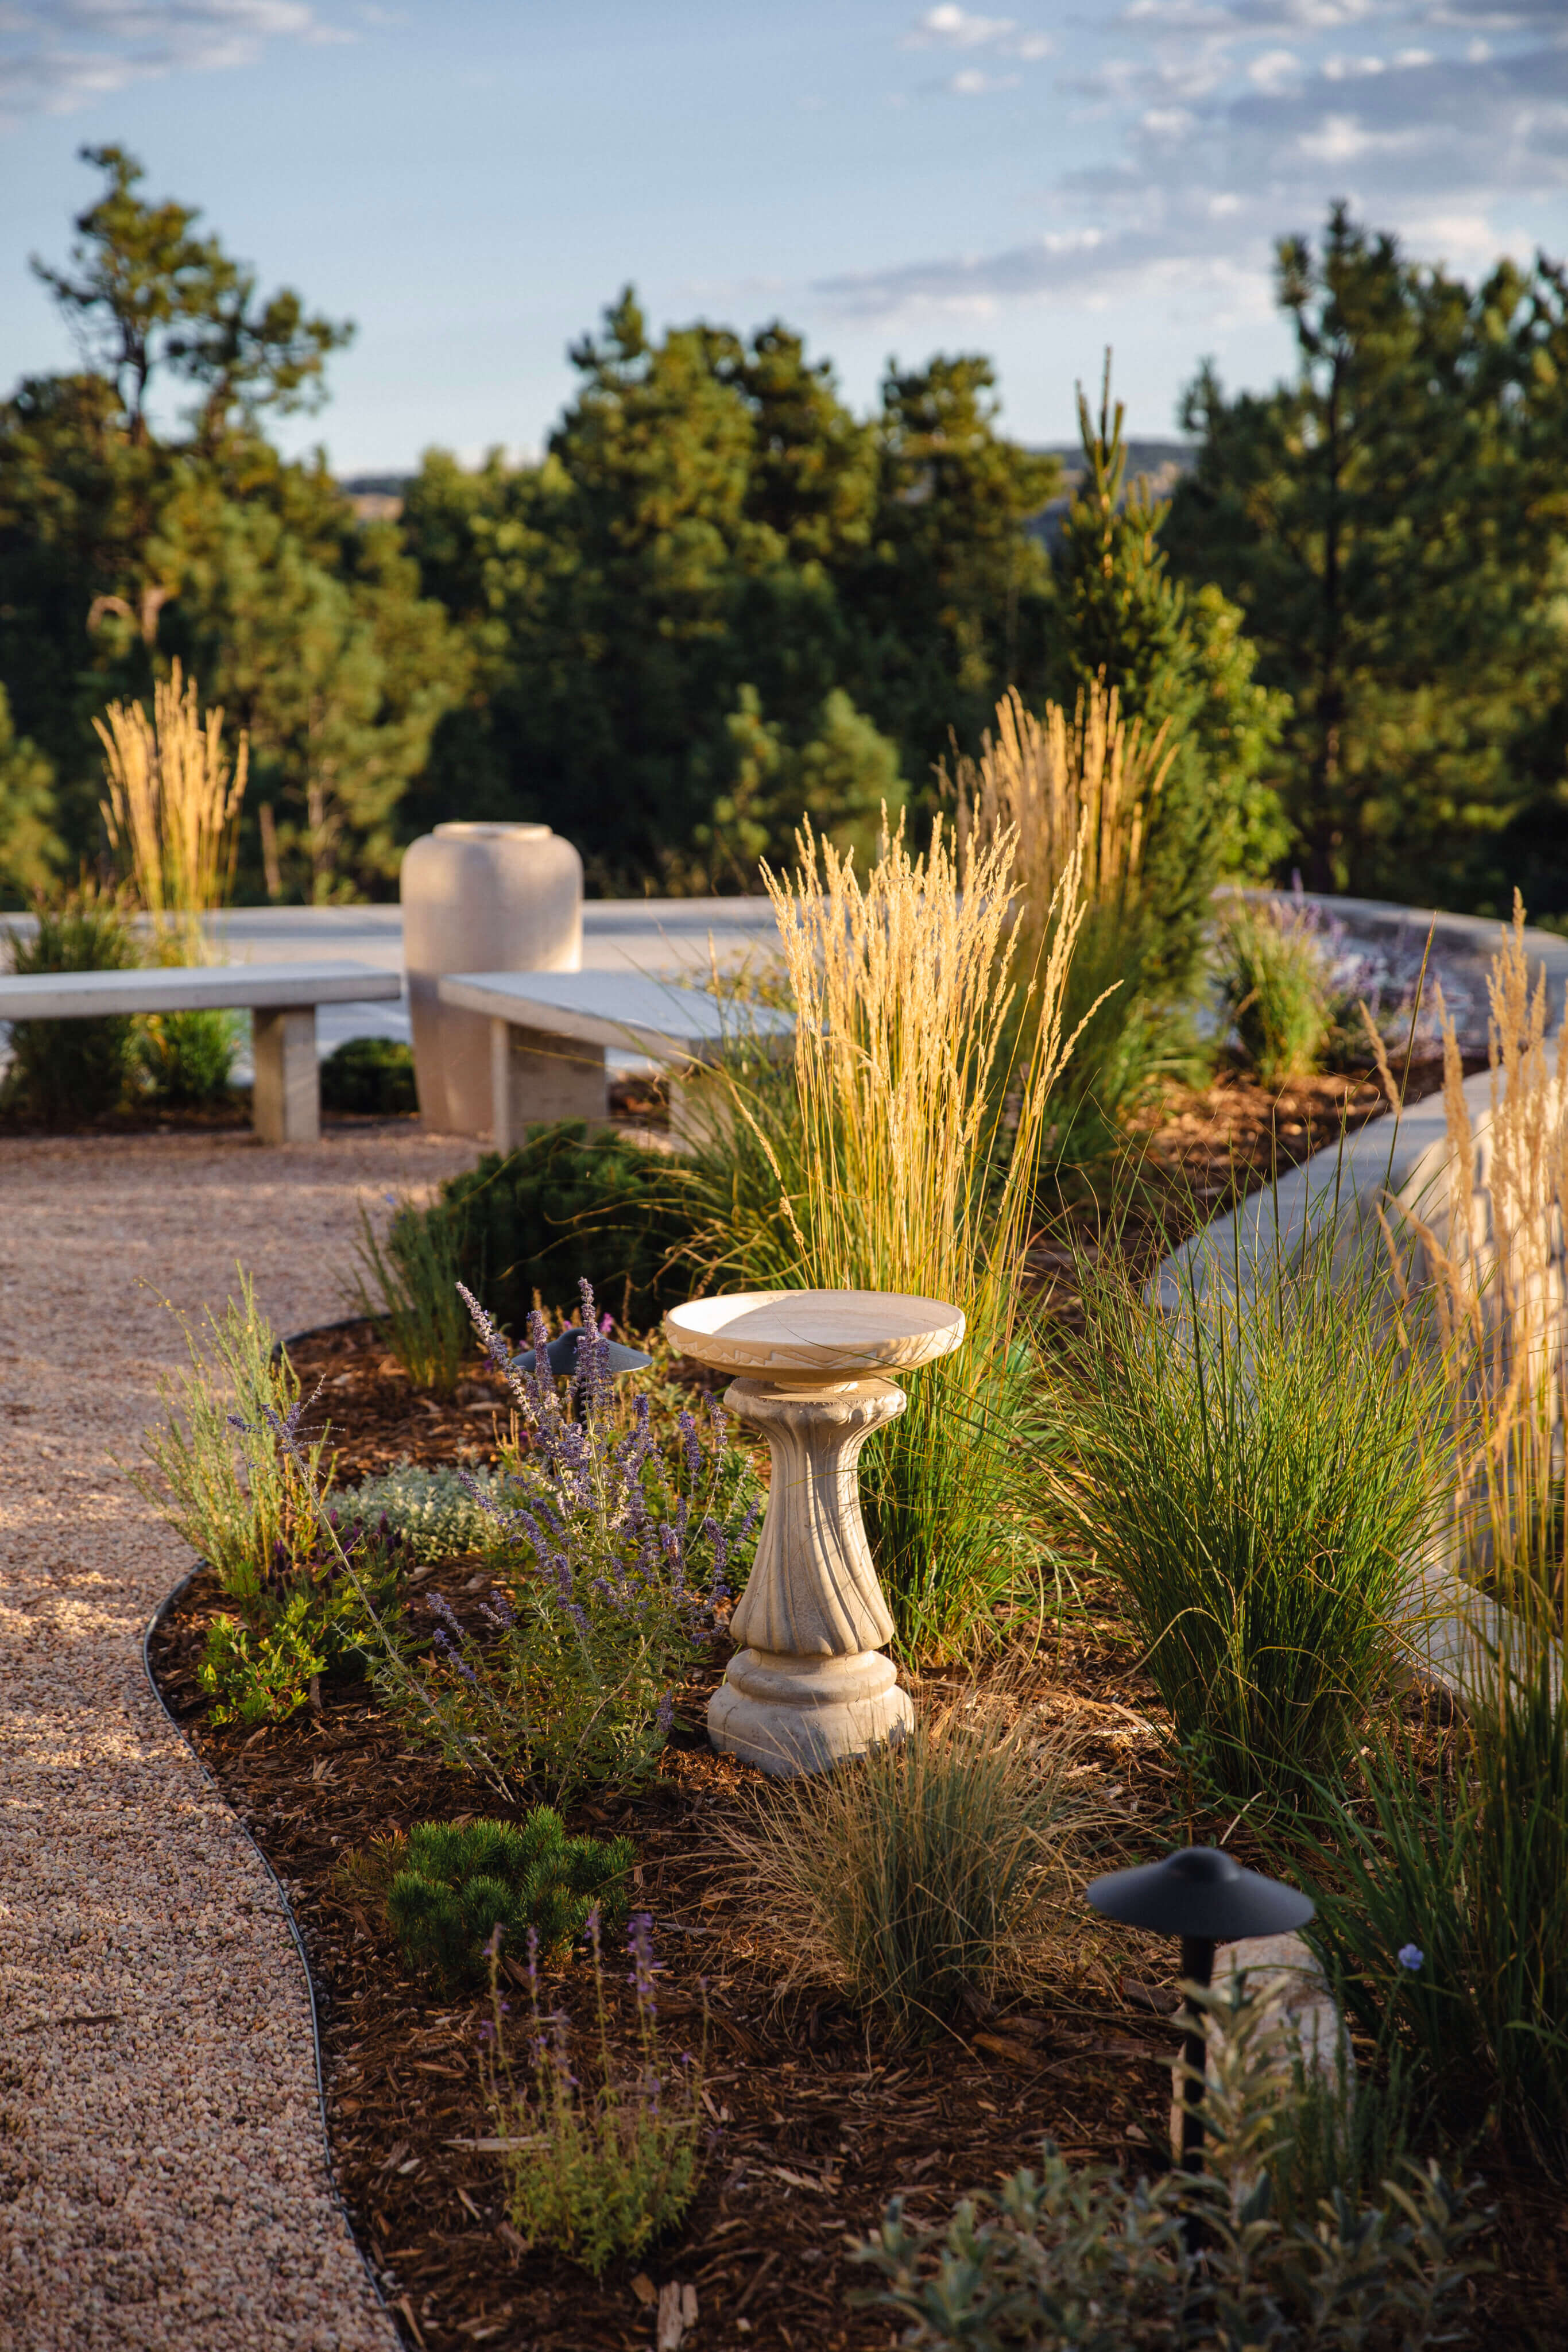 A small water feature in a planting bed, surrounded by ornamental grasses and other plants.